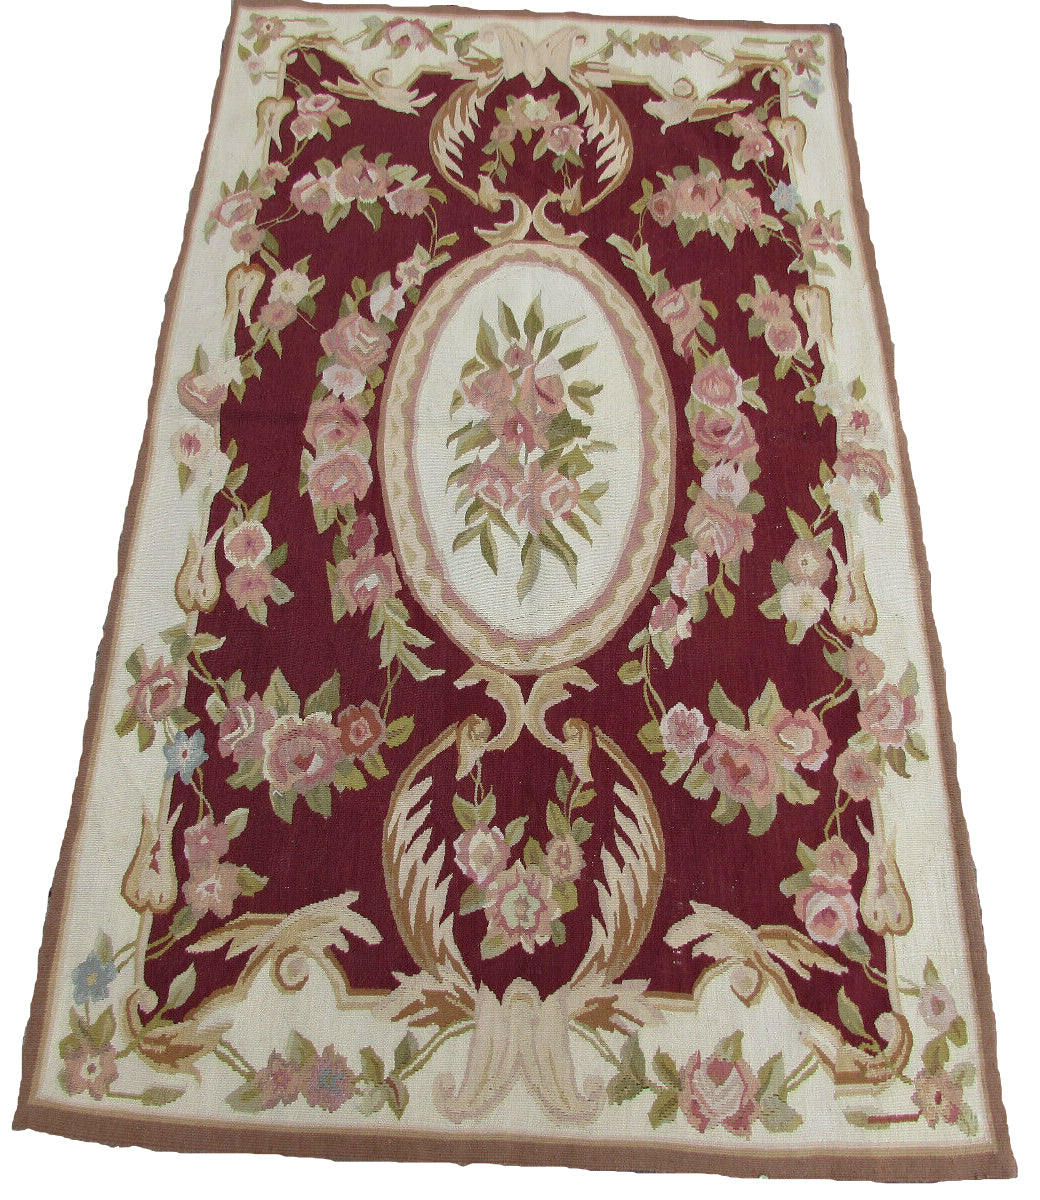 Vintage French Aubusson rug - 1970s wool handmade rug with beige, burgundy, olive green, and rose colors.